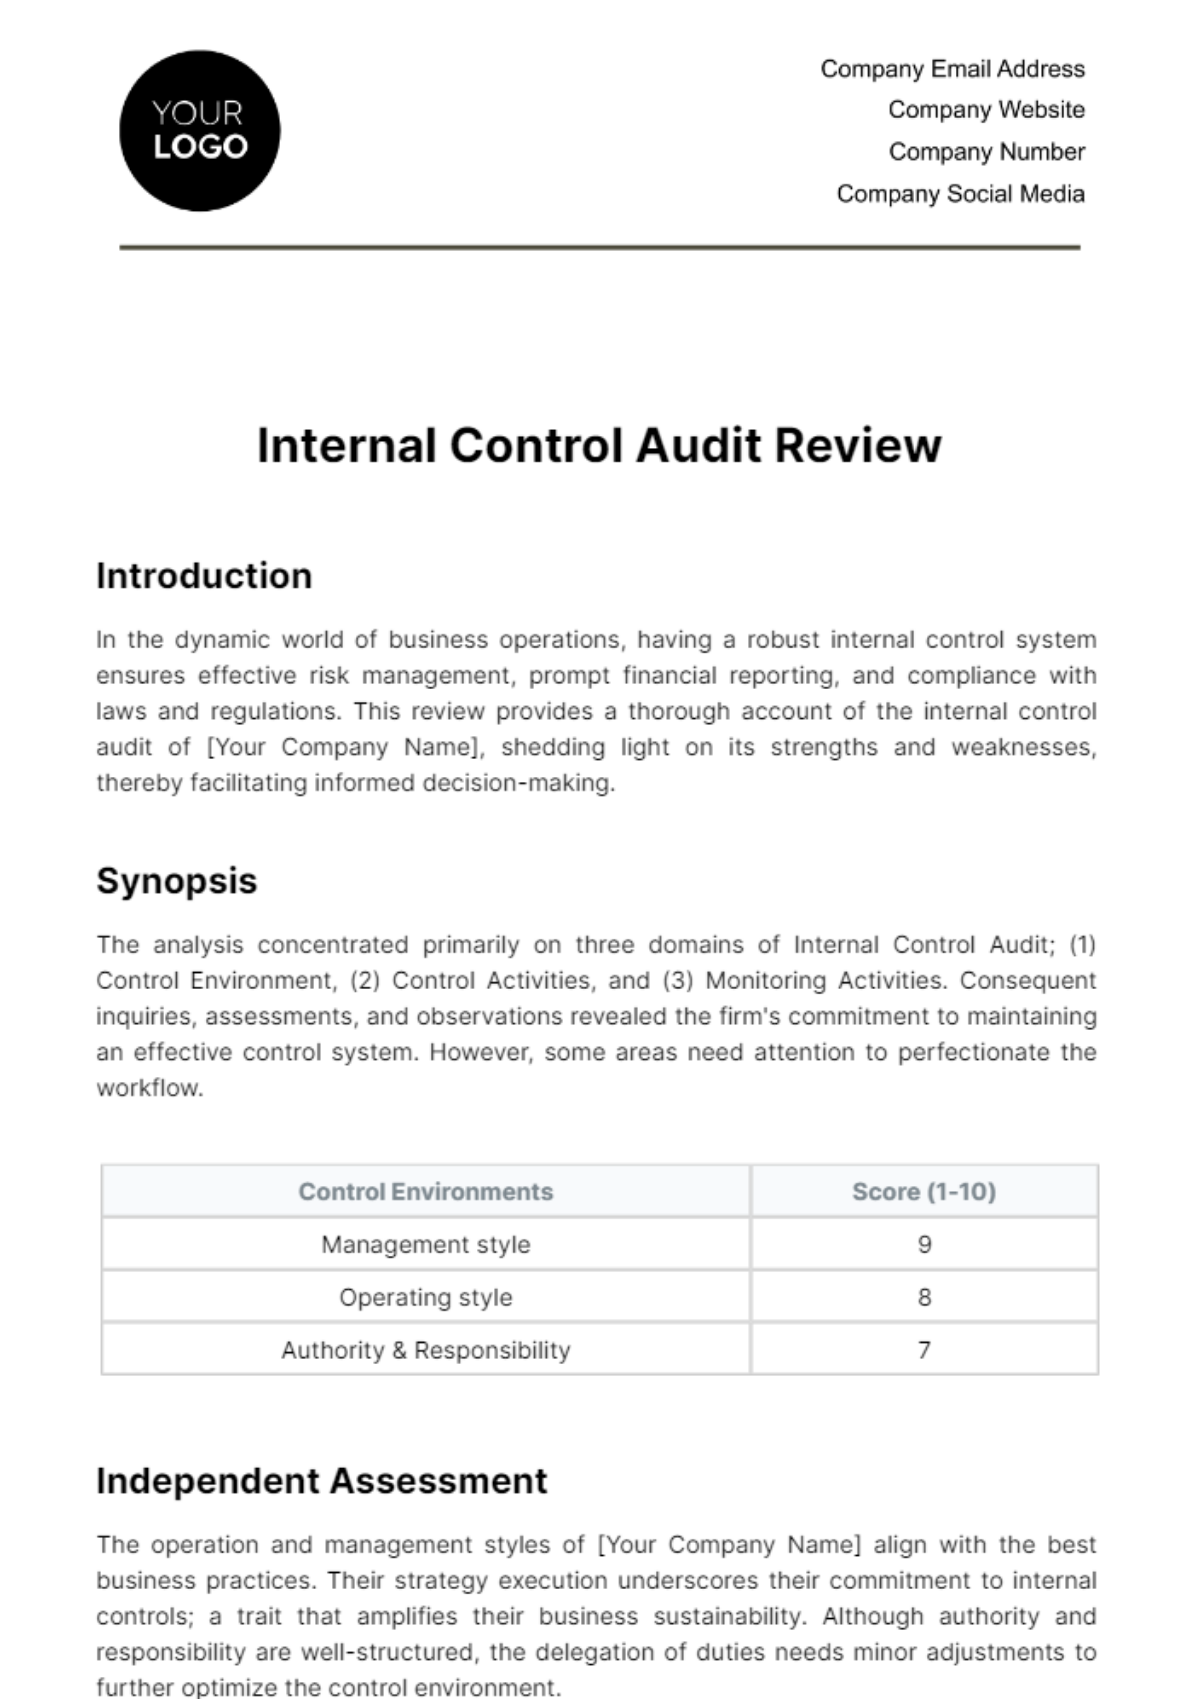 Free Internal Control Audit Review Template